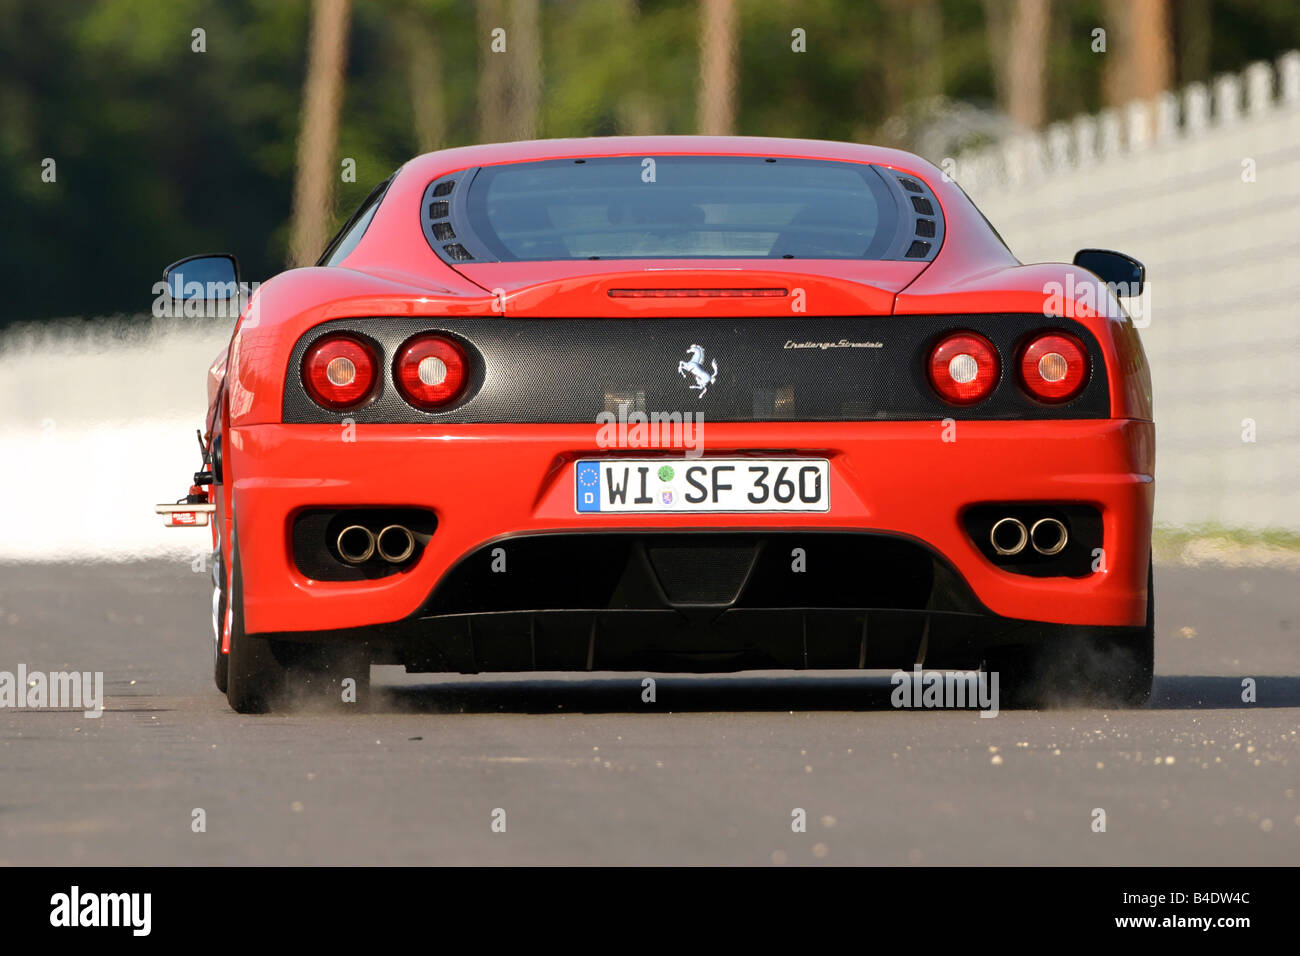 Car, Ferrari 360 Challenge Stradale, roadster, coupe/Coupe, red, standing, upholding, Rear view Stock Photo